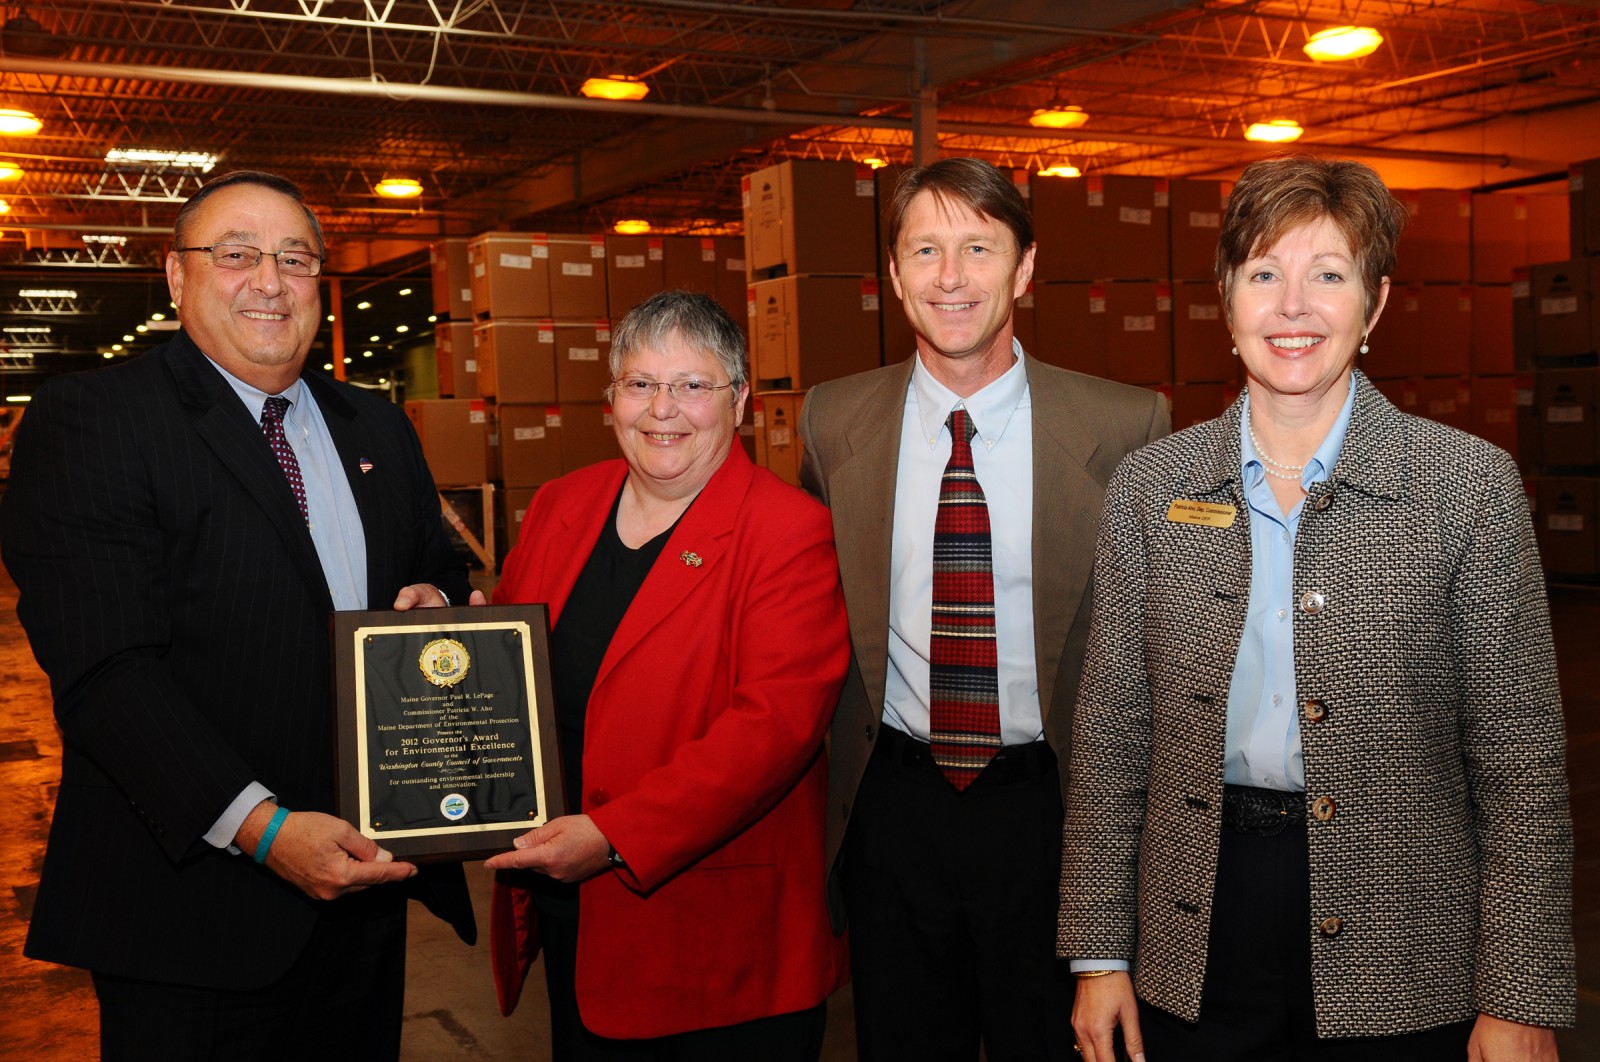 2012 Governor's Award for Environmental Excellence in the Public Sector to WCCOG; Governor Paul Lepage, WCCOG Board President Betsy Fitzgerald, GEI Brownfields Consultant Todd Coffin, Maine DEP Commissioner Patricia Aho